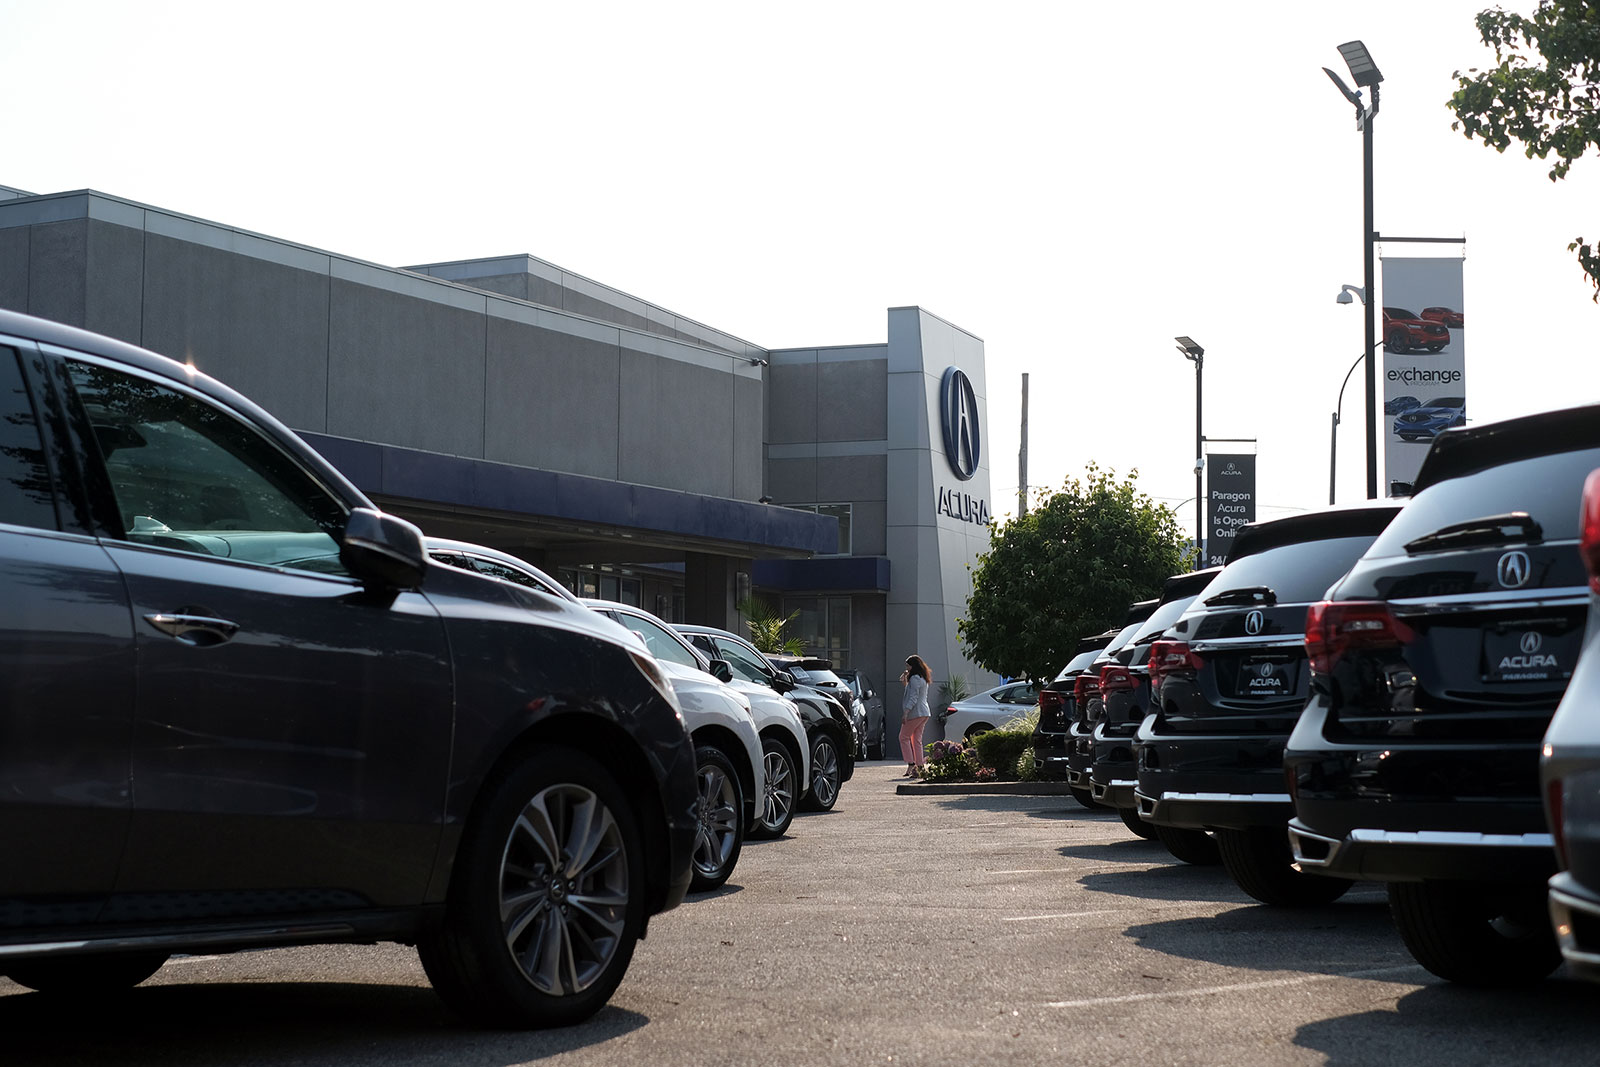 Cars sit in a lot at an Acura dealership in Queens, New York, on July 15.